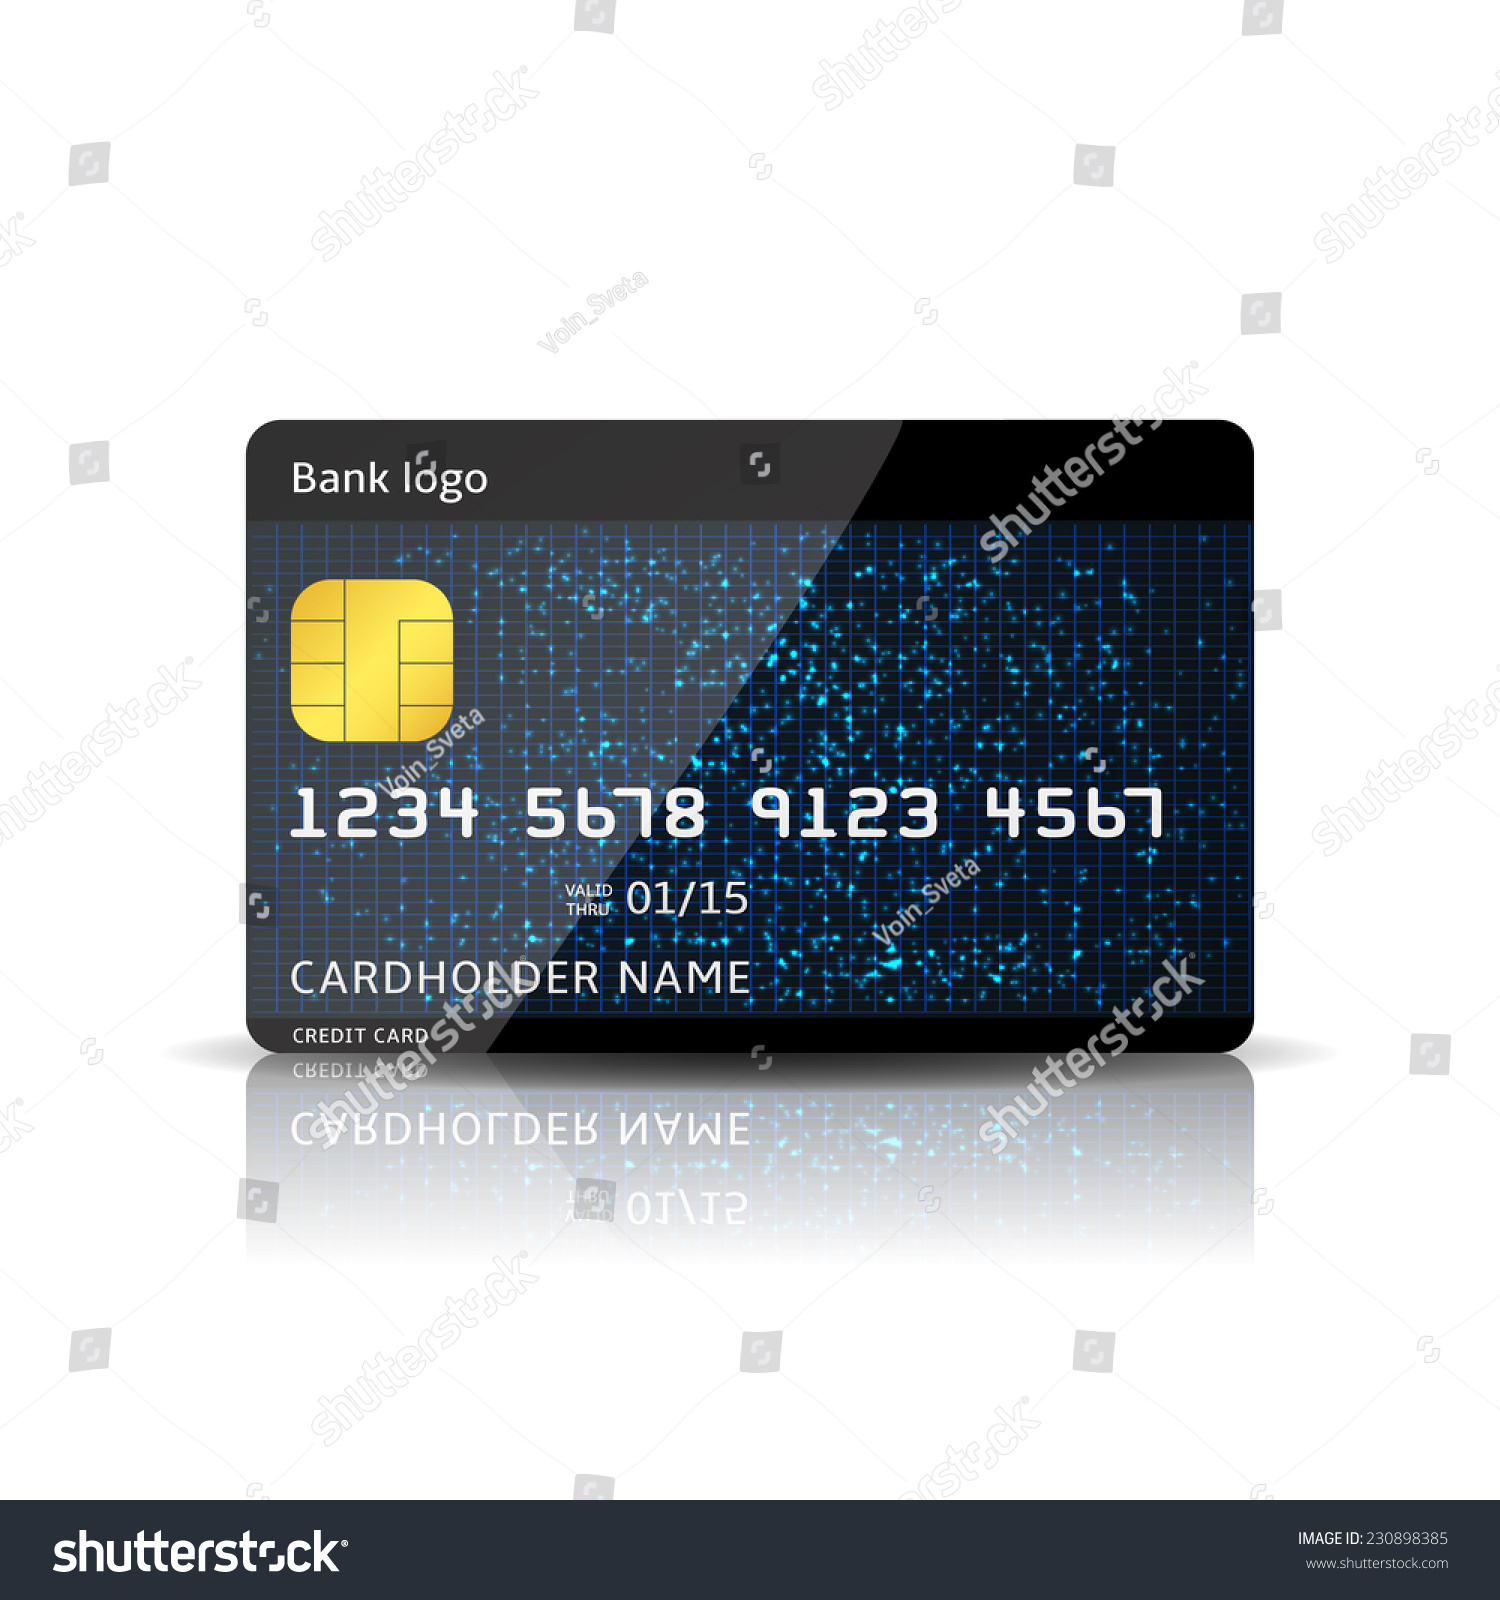 Vector Illustration Very Realistic Credit Card Stock Vector Royalty Free